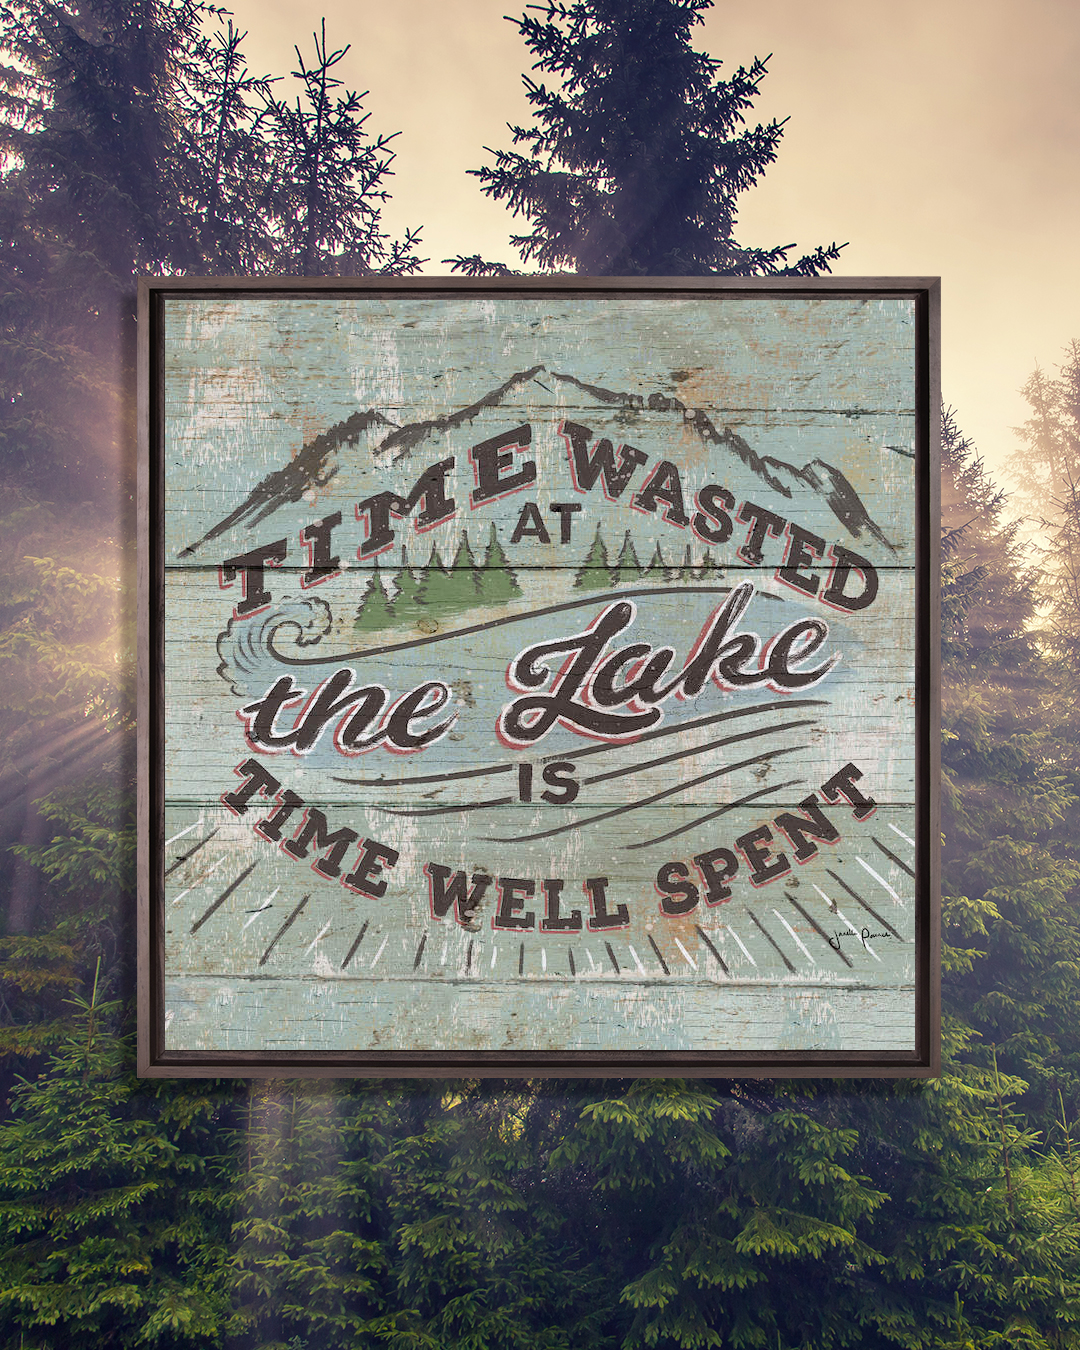 phrase "time wasted at the lake is time well spent" on worn-looking light-green wood panels